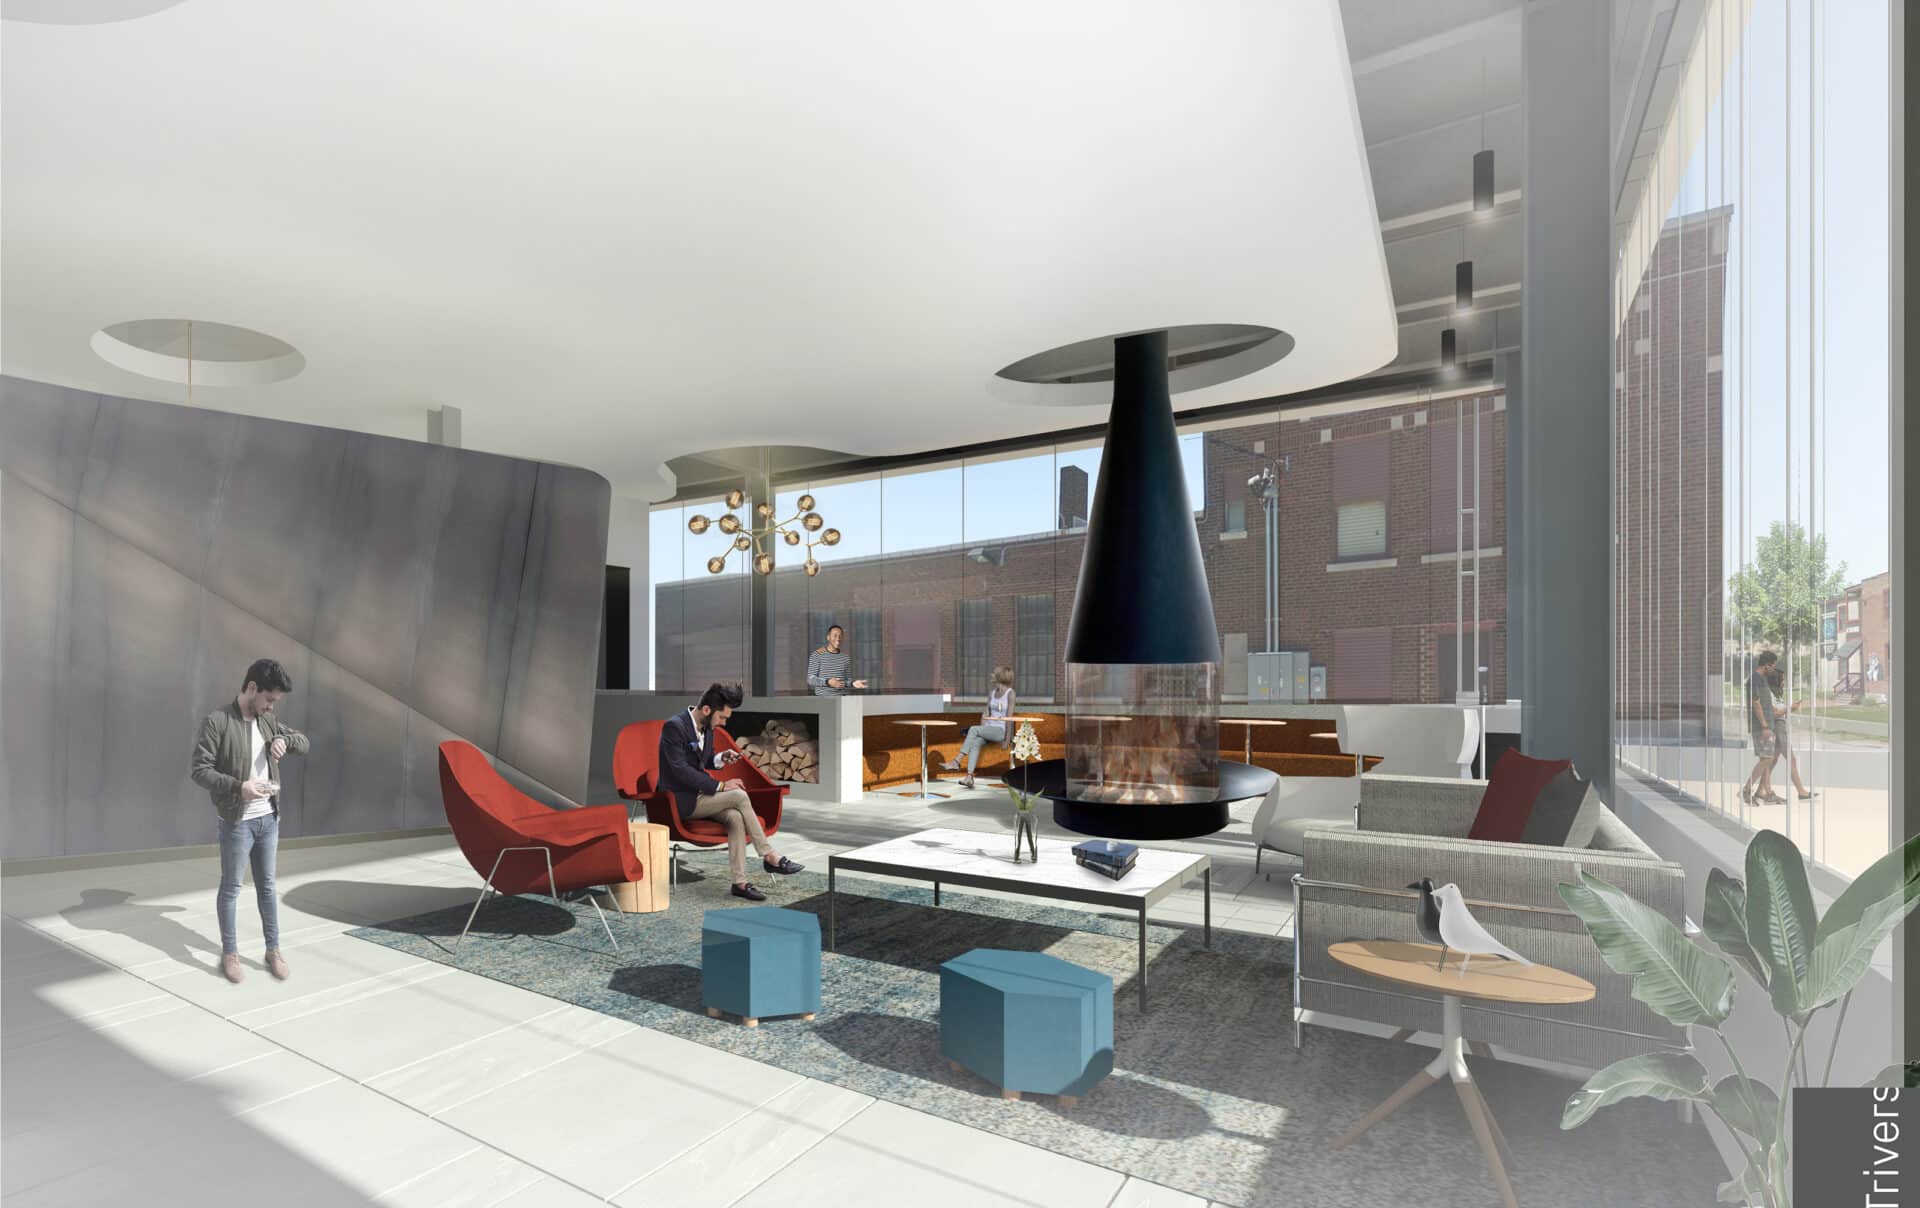 Mill Creek Condo Interior Flats Rendering By Trivers Architectural Firm